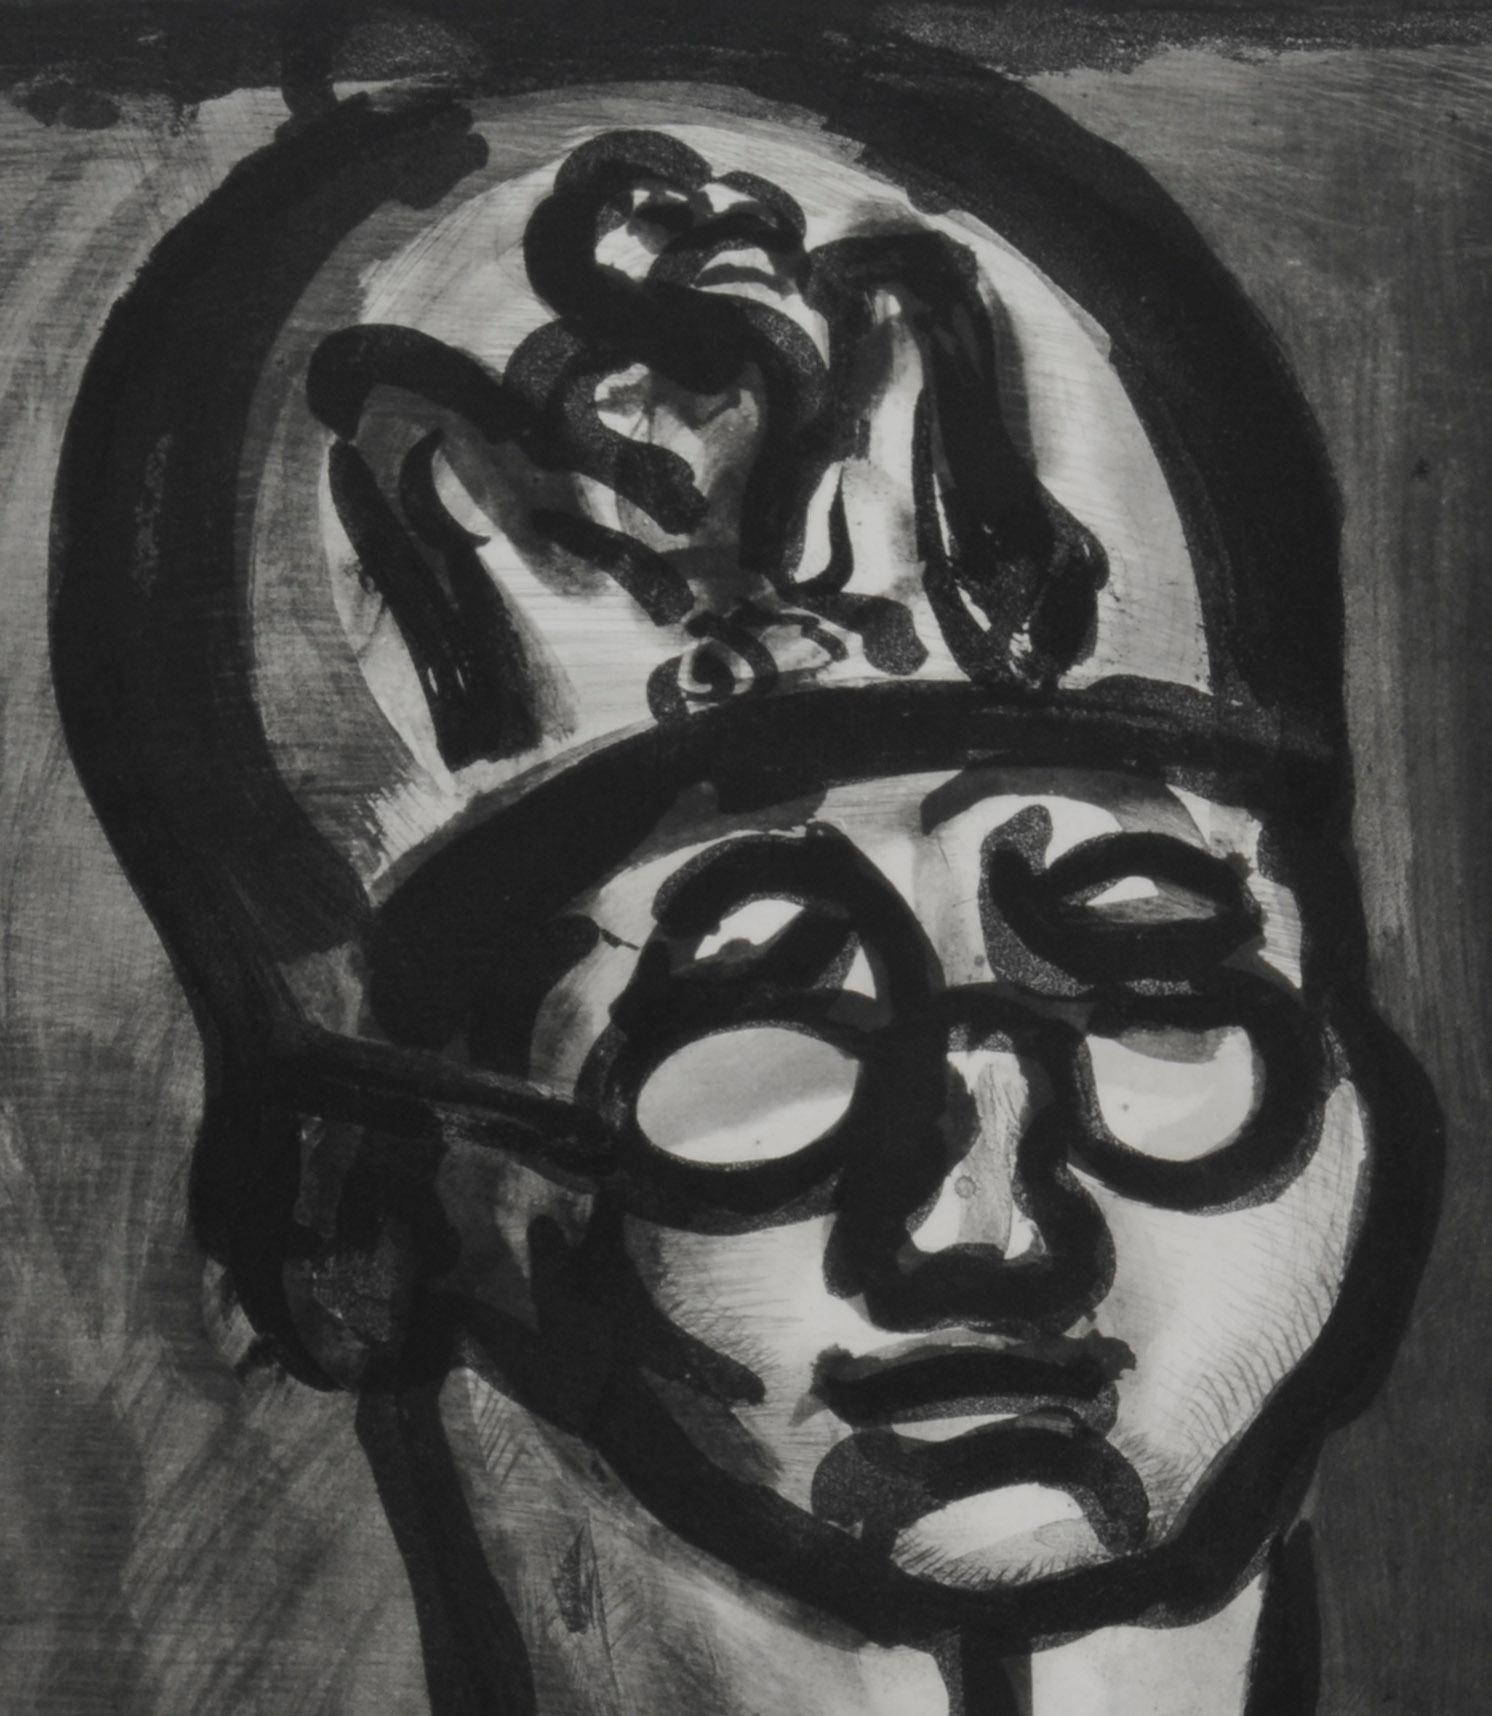 Loin du sourire de Reims (Far from the Smile of Rheims) - Print by Georges Rouault